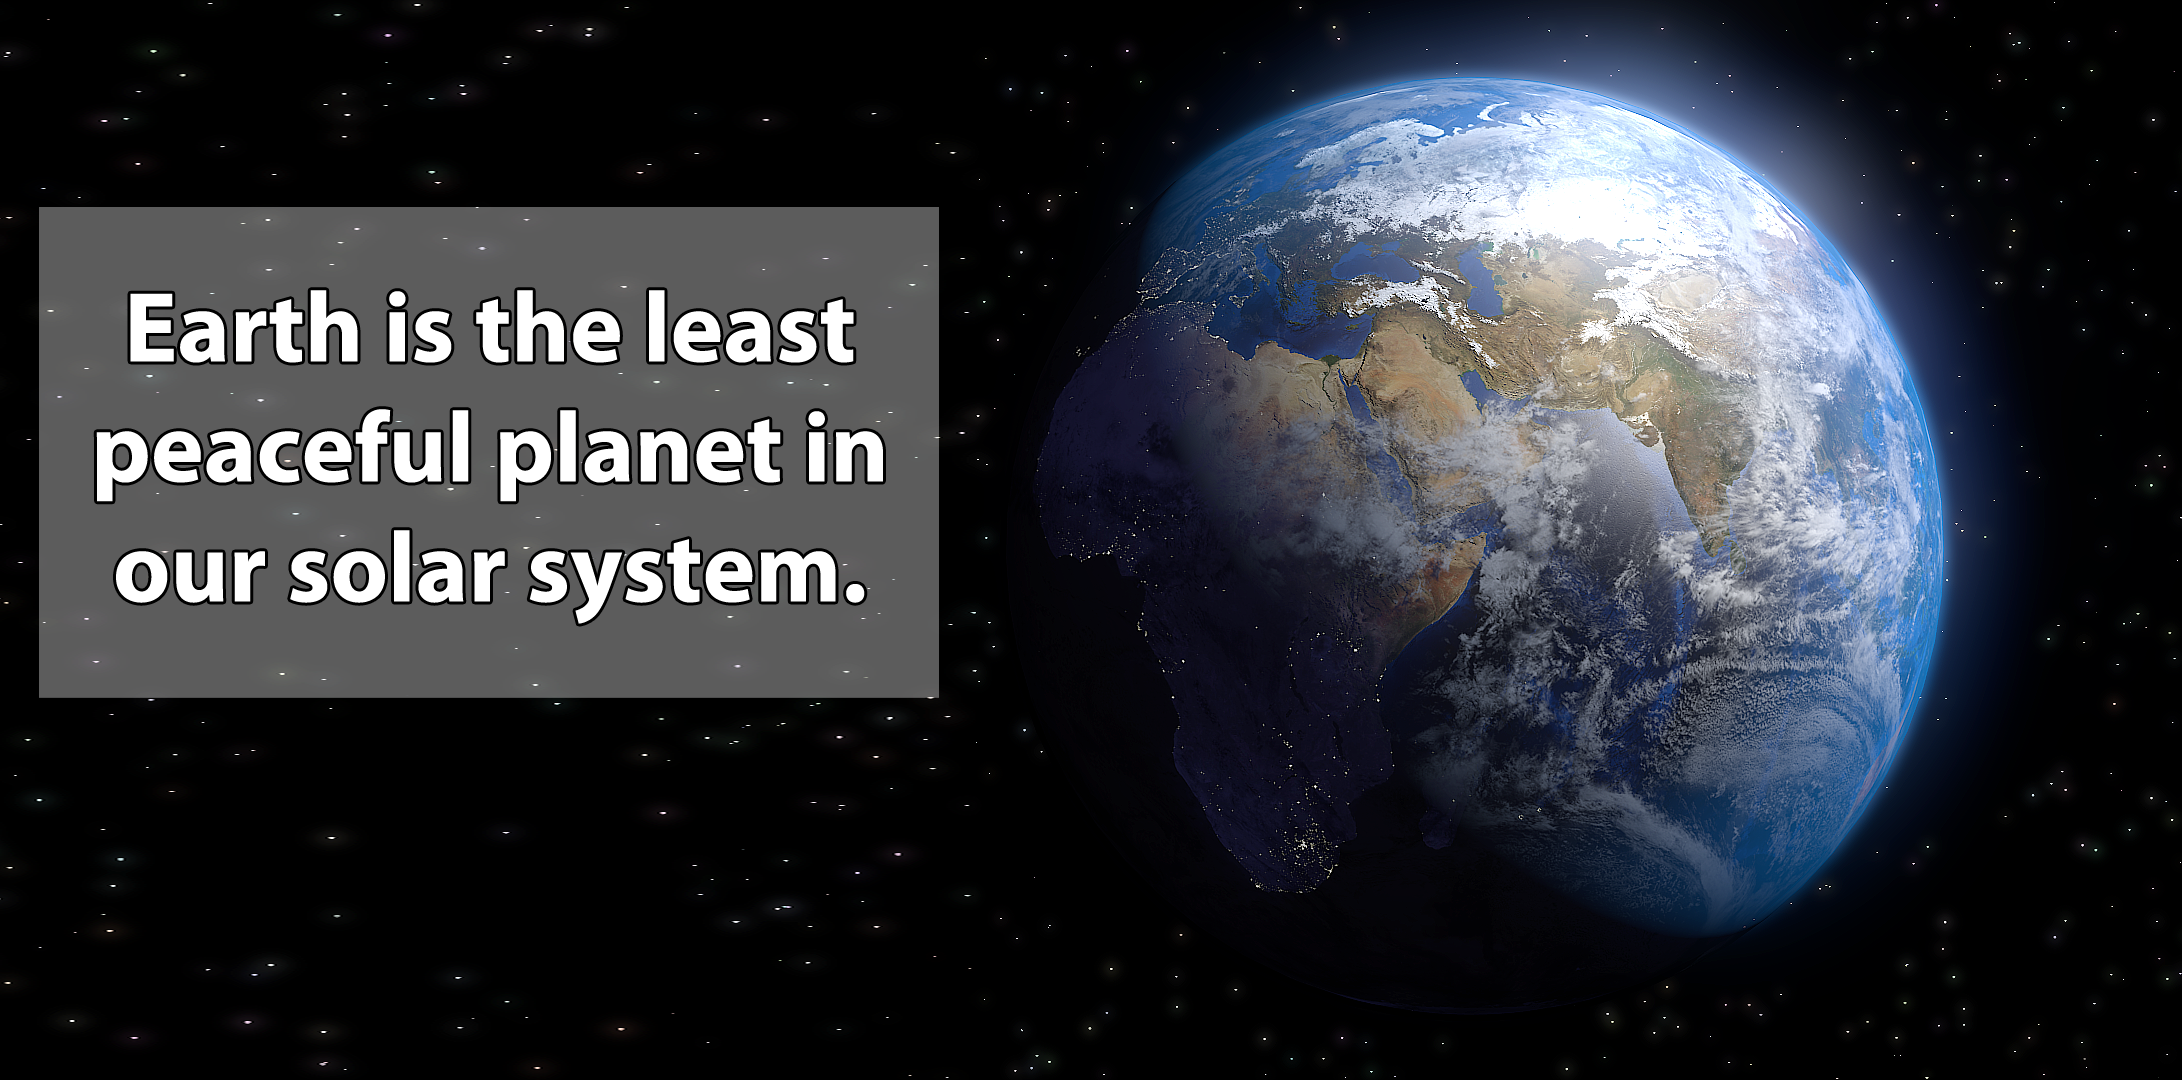 Earth is the least peaceful planet in our solar system.